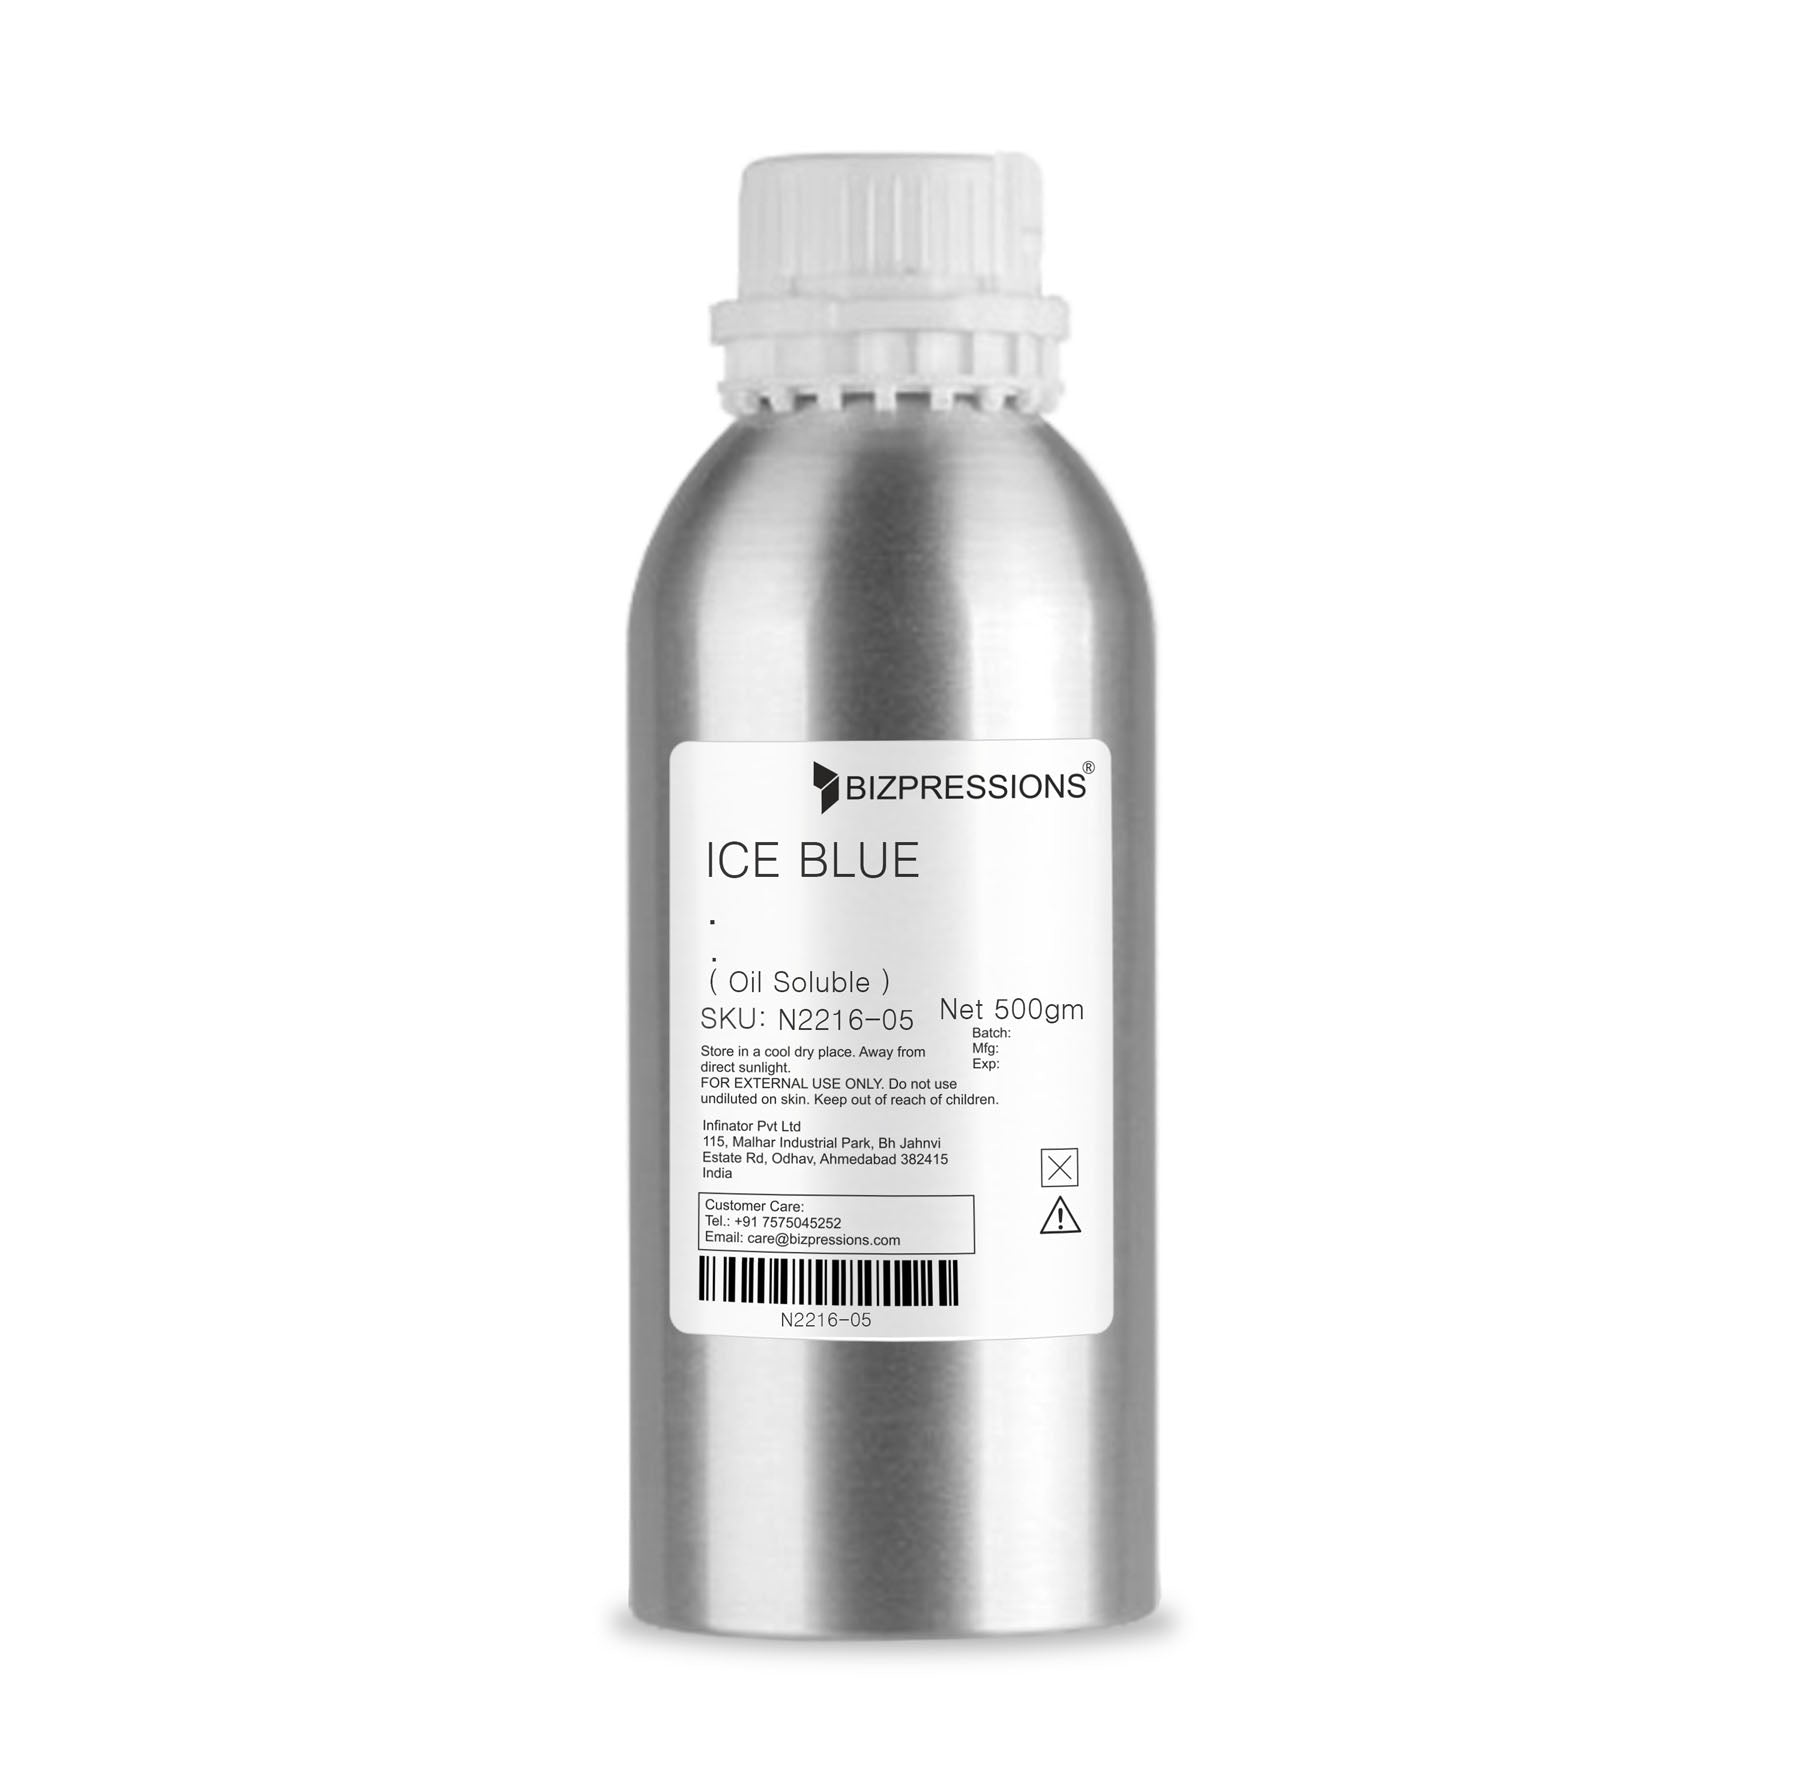 ICE BLUE - Fragrance ( Oil Soluble ) - 500 gm